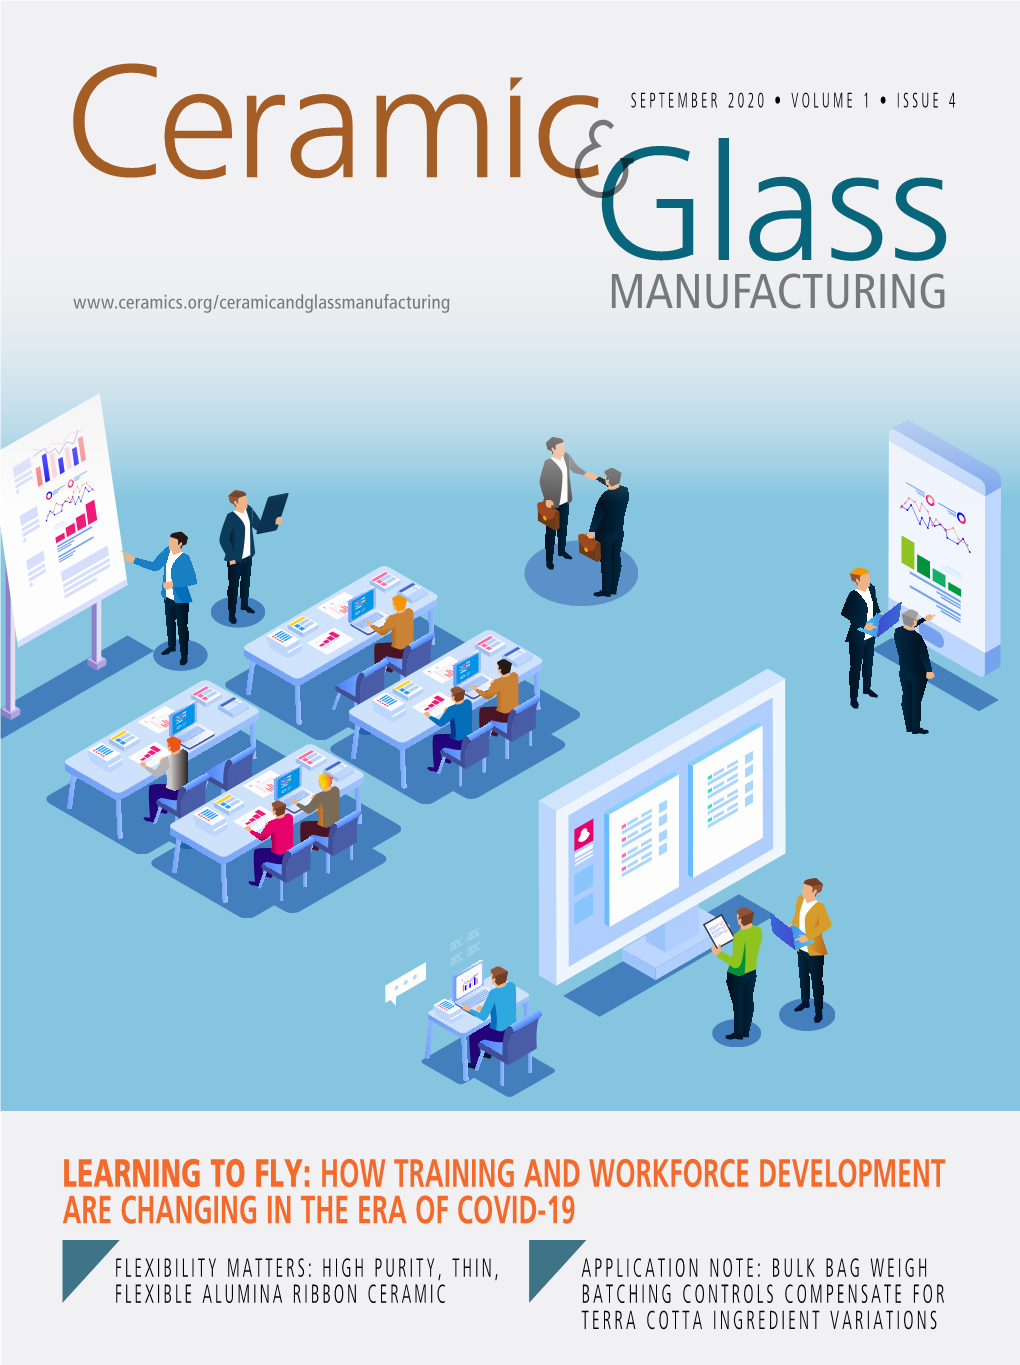 Learning to Fly: How Training and Workforce Development Are